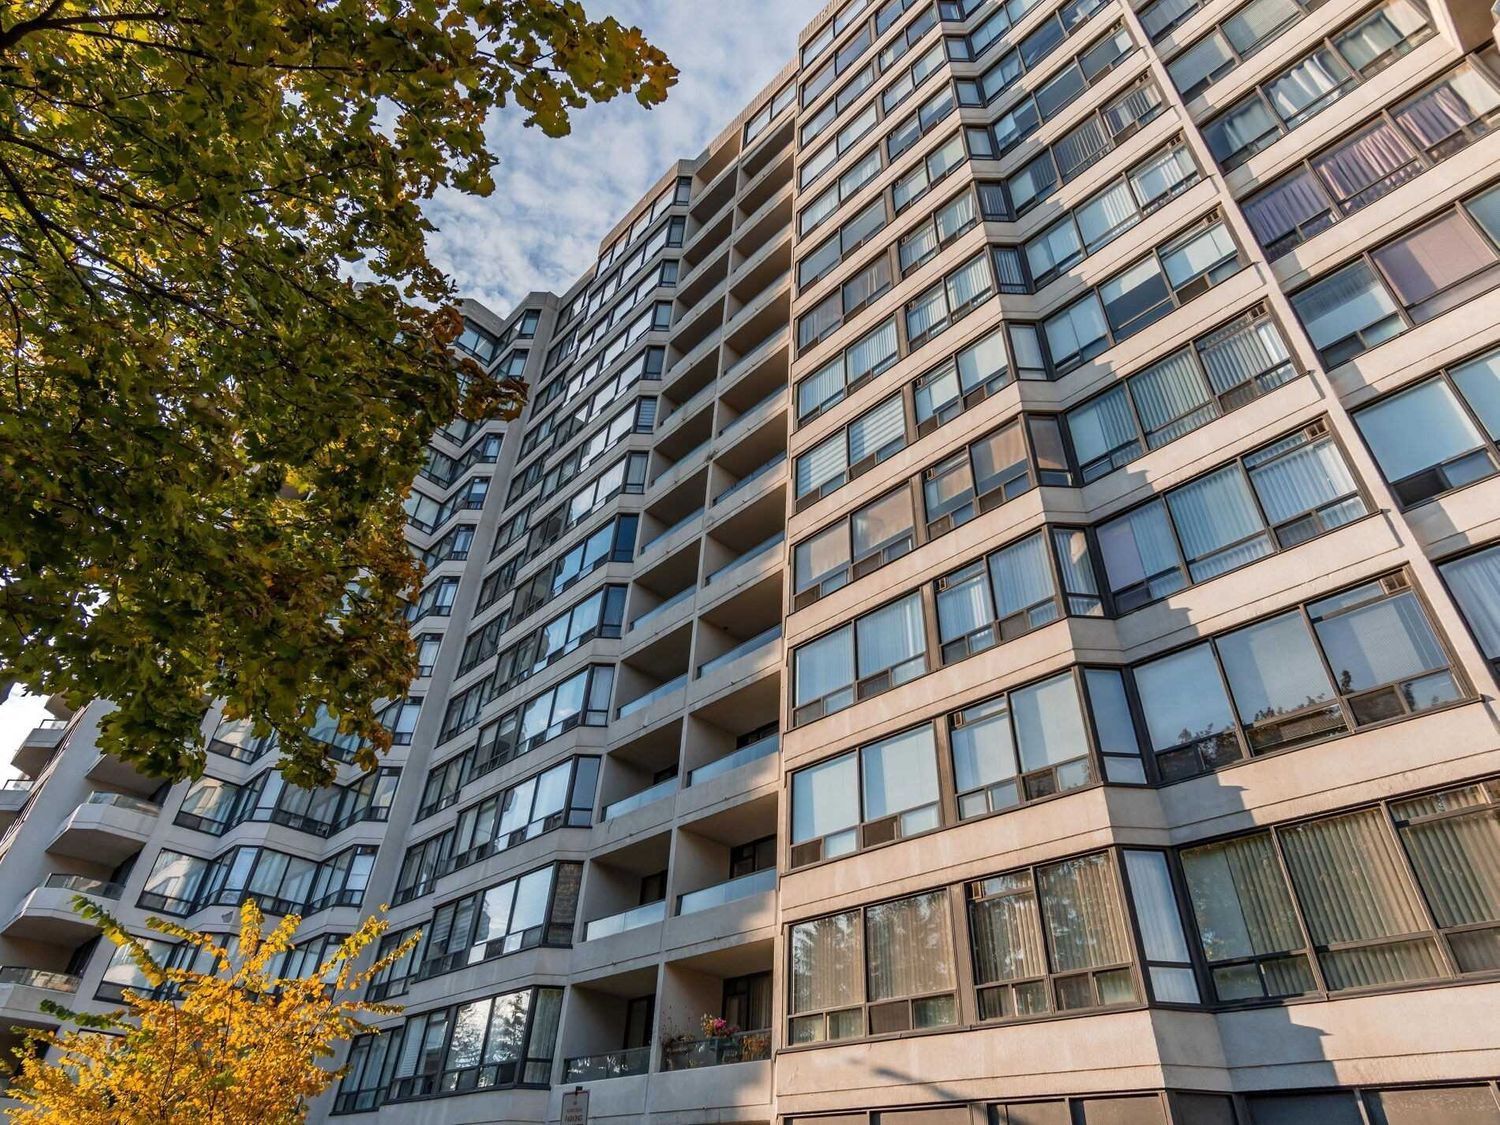 8501 Bayview Avenue. Bayview Towers Condos is located in  Richmond Hill, Toronto - image #3 of 3